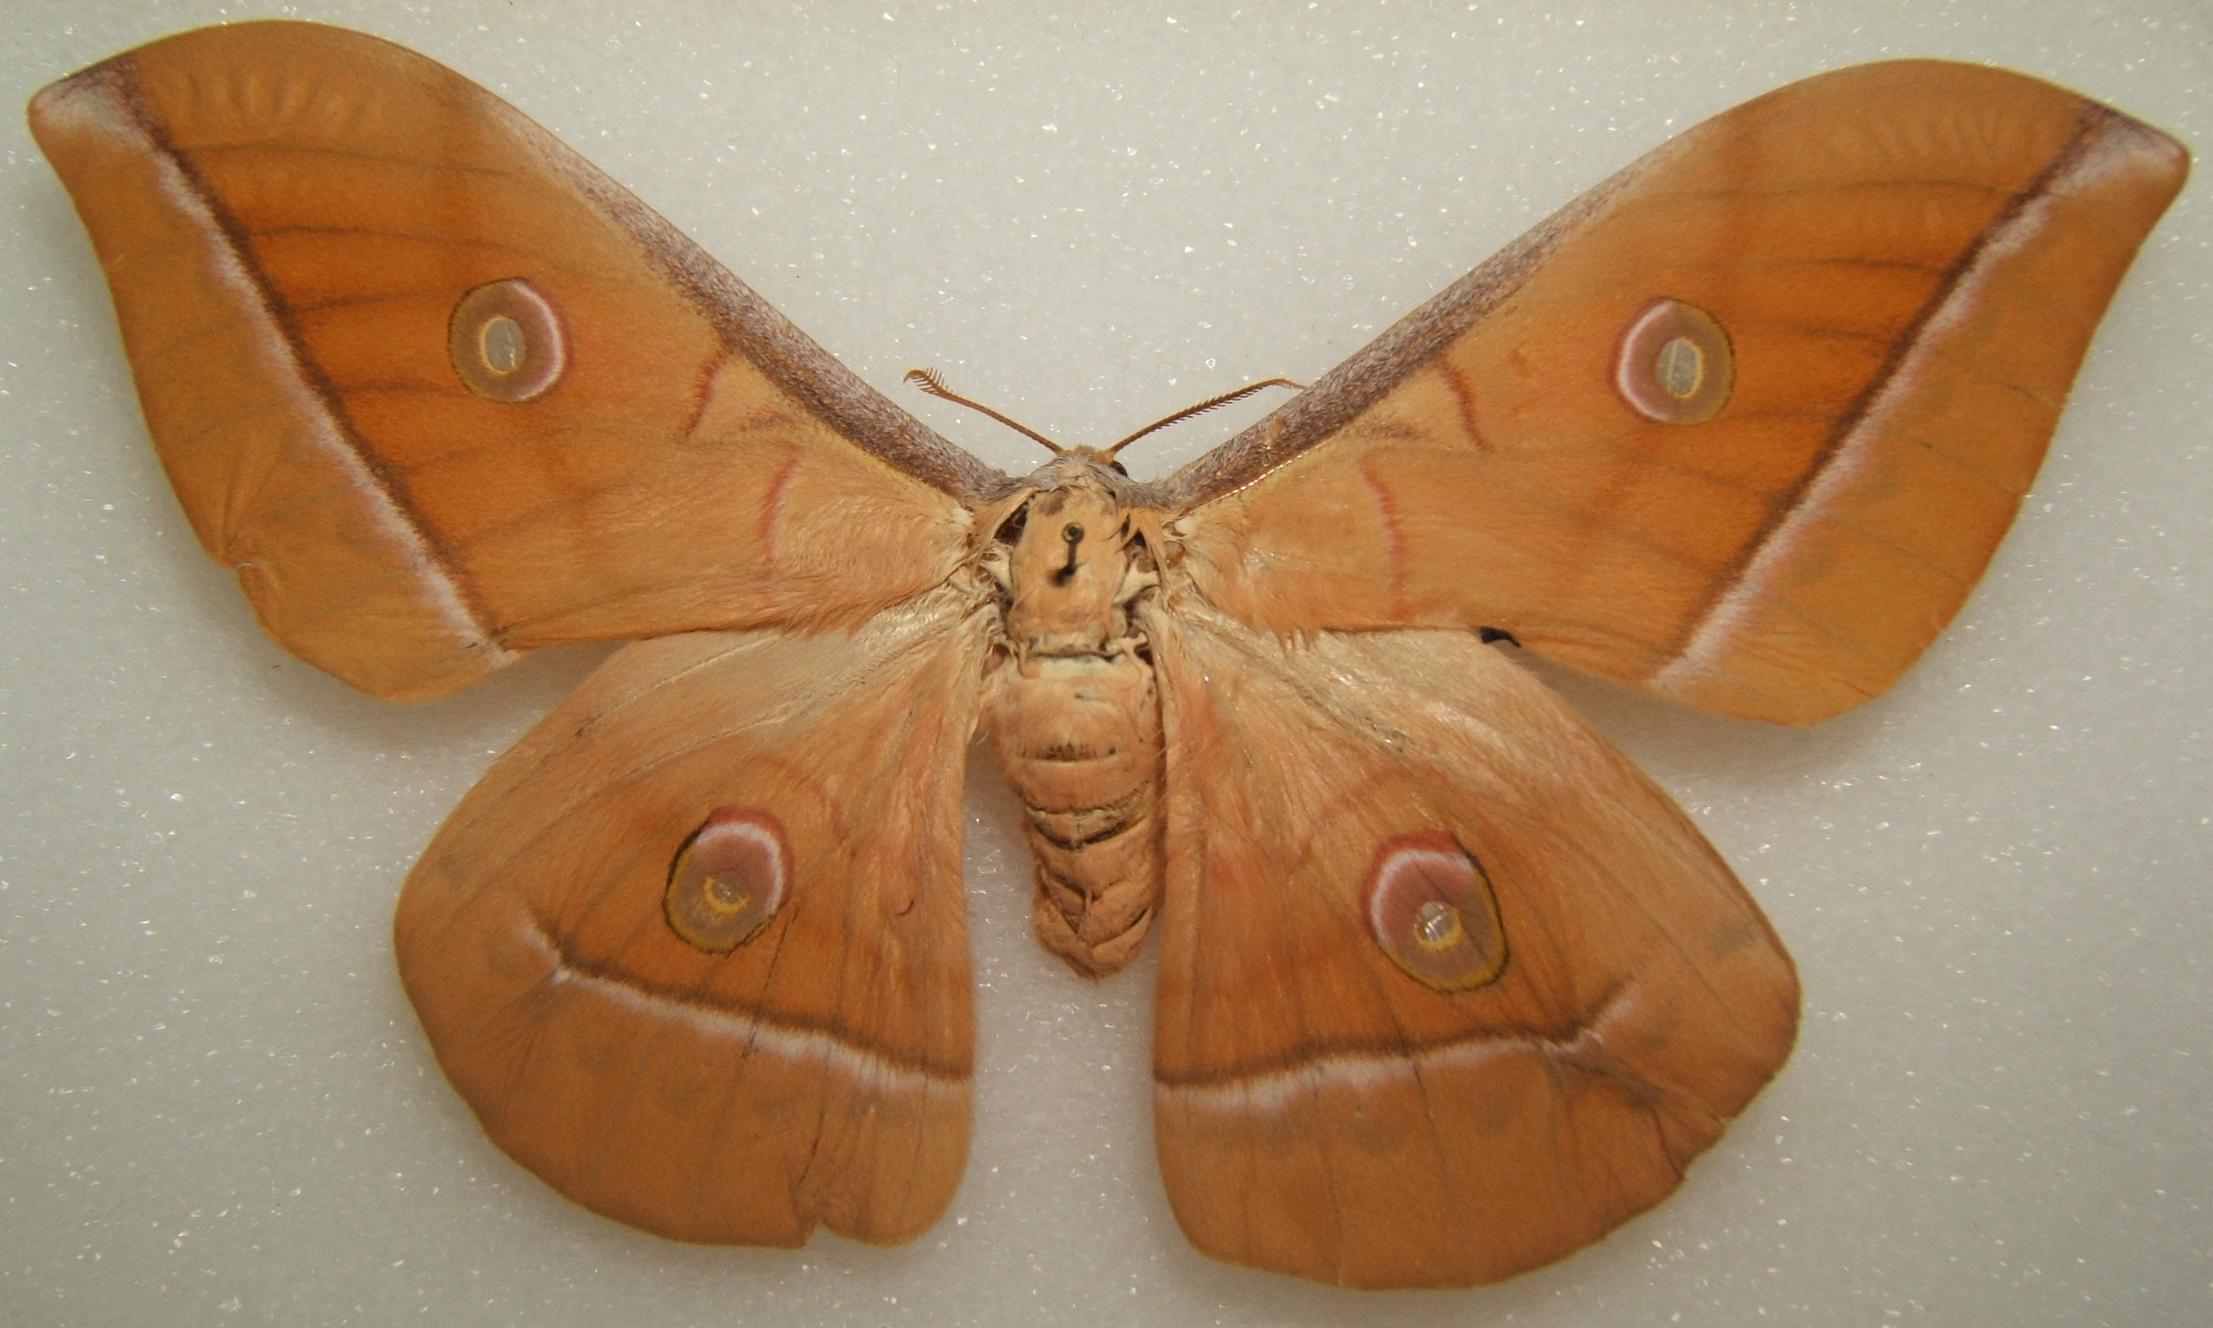 Real Moths A1 Mother's Day Antheraea pernyi 1pcs Saturniidae Actias Butterfly Large UNSPRED Dry Insects Taxidermy